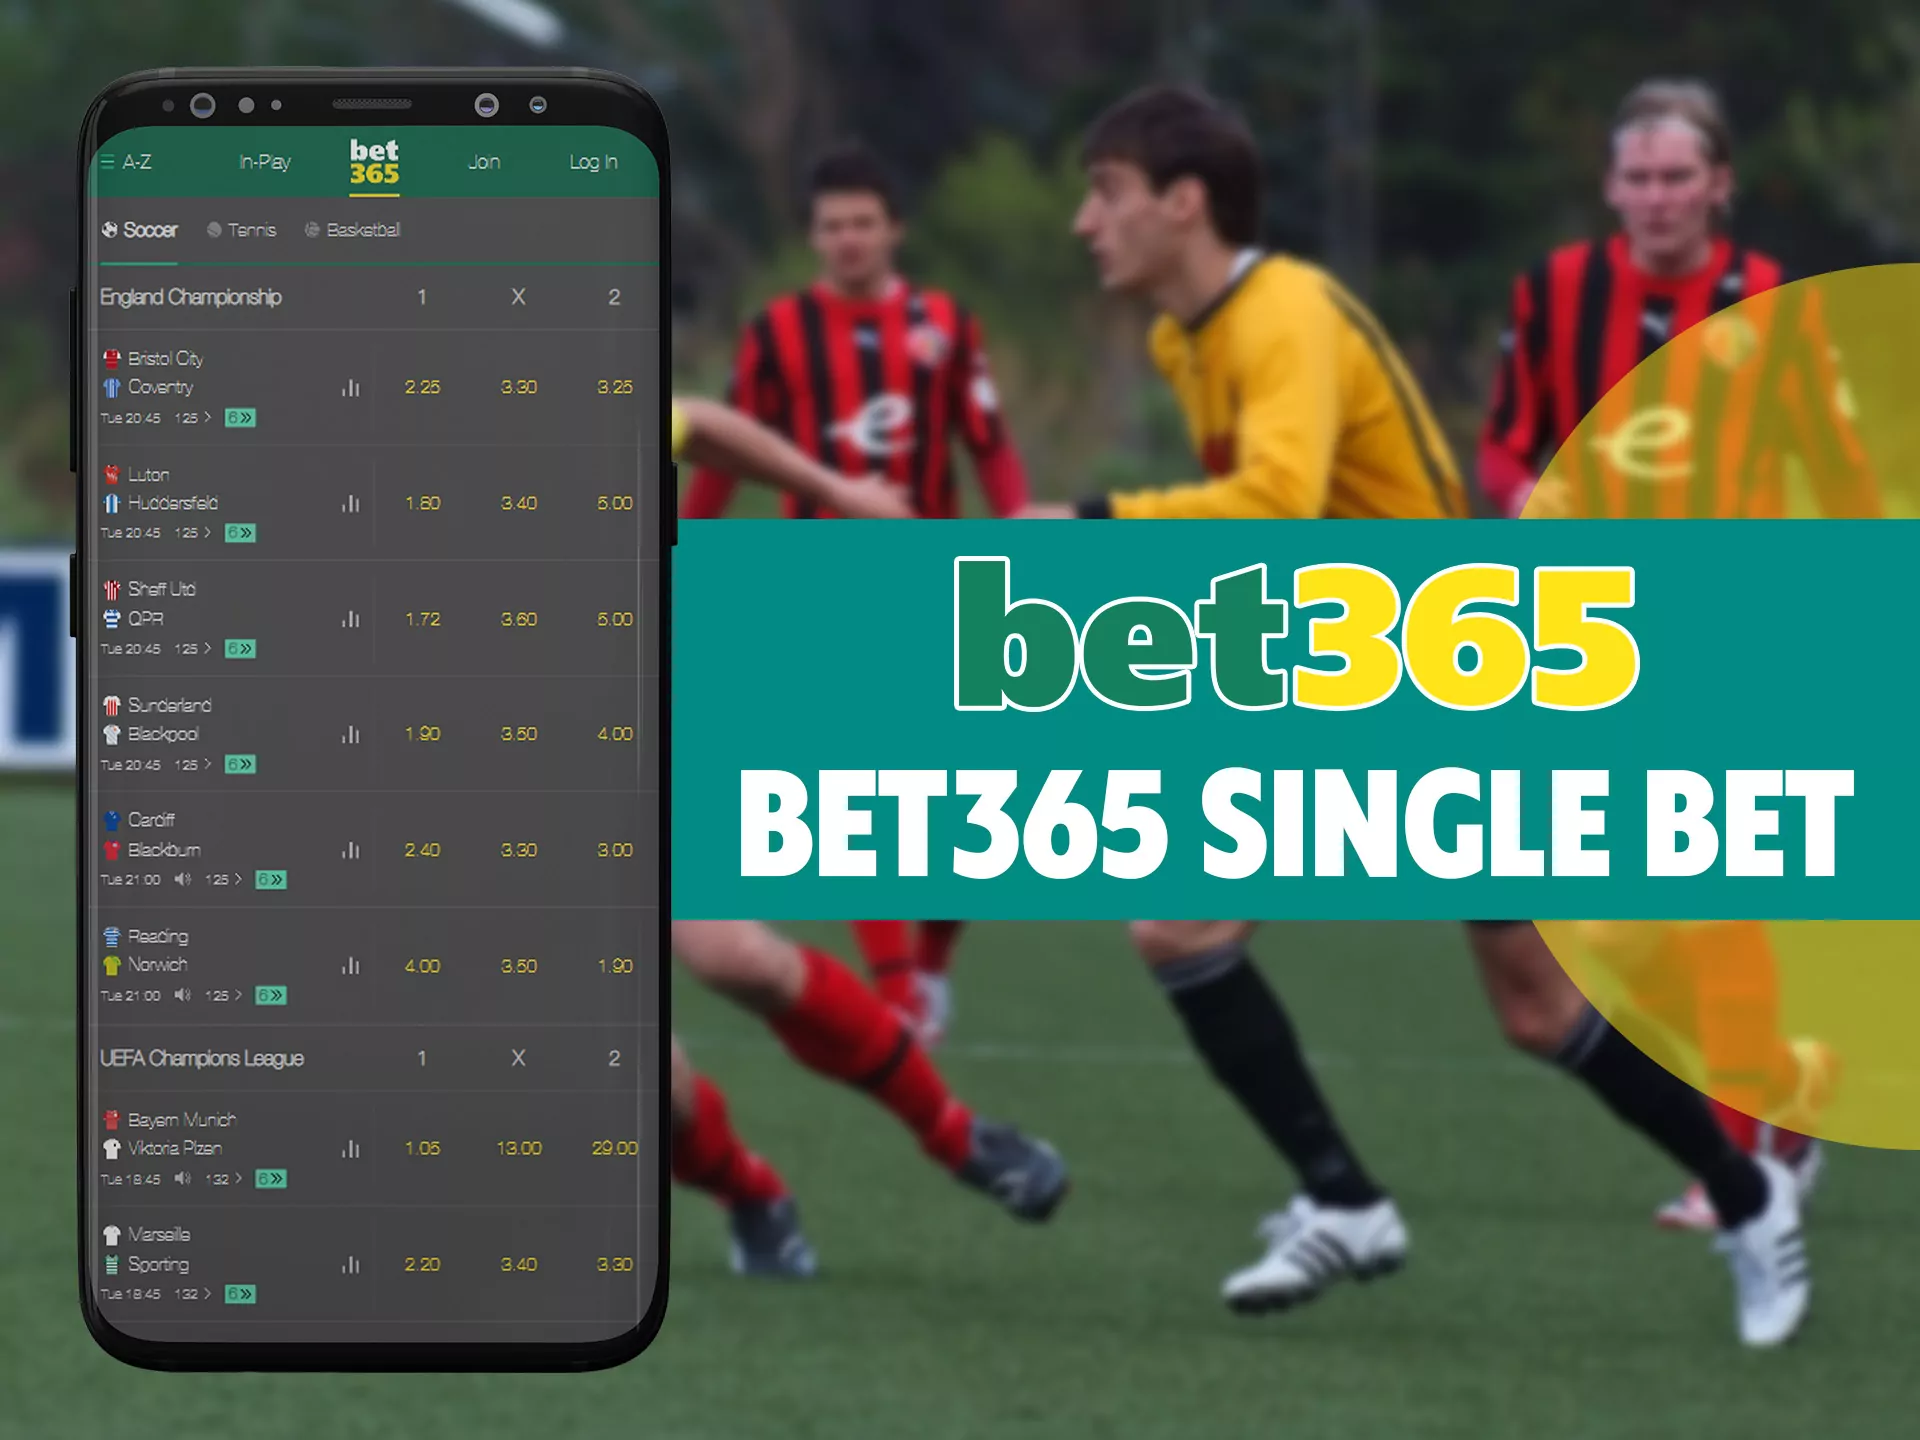 Make multiple single bets and win all of them at Bet365.